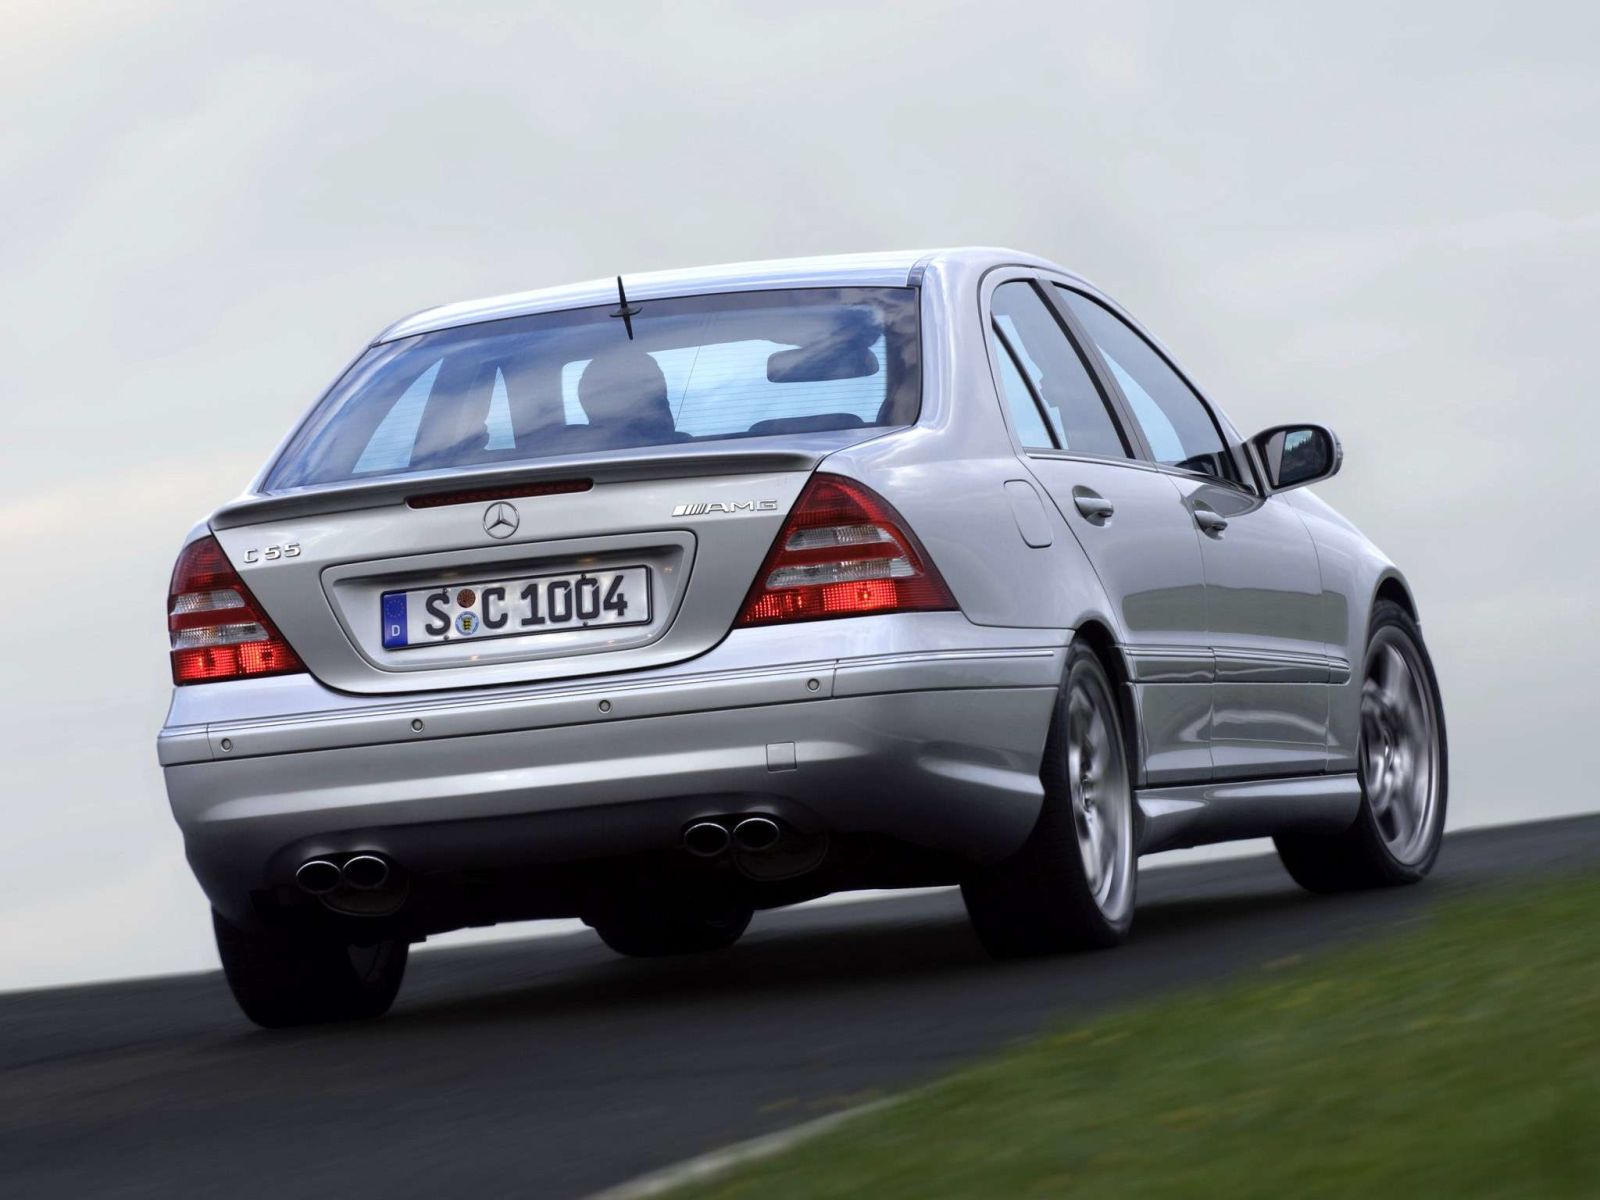 Illustration for article titled OPPOinions on 2005/6 C55 AMG?